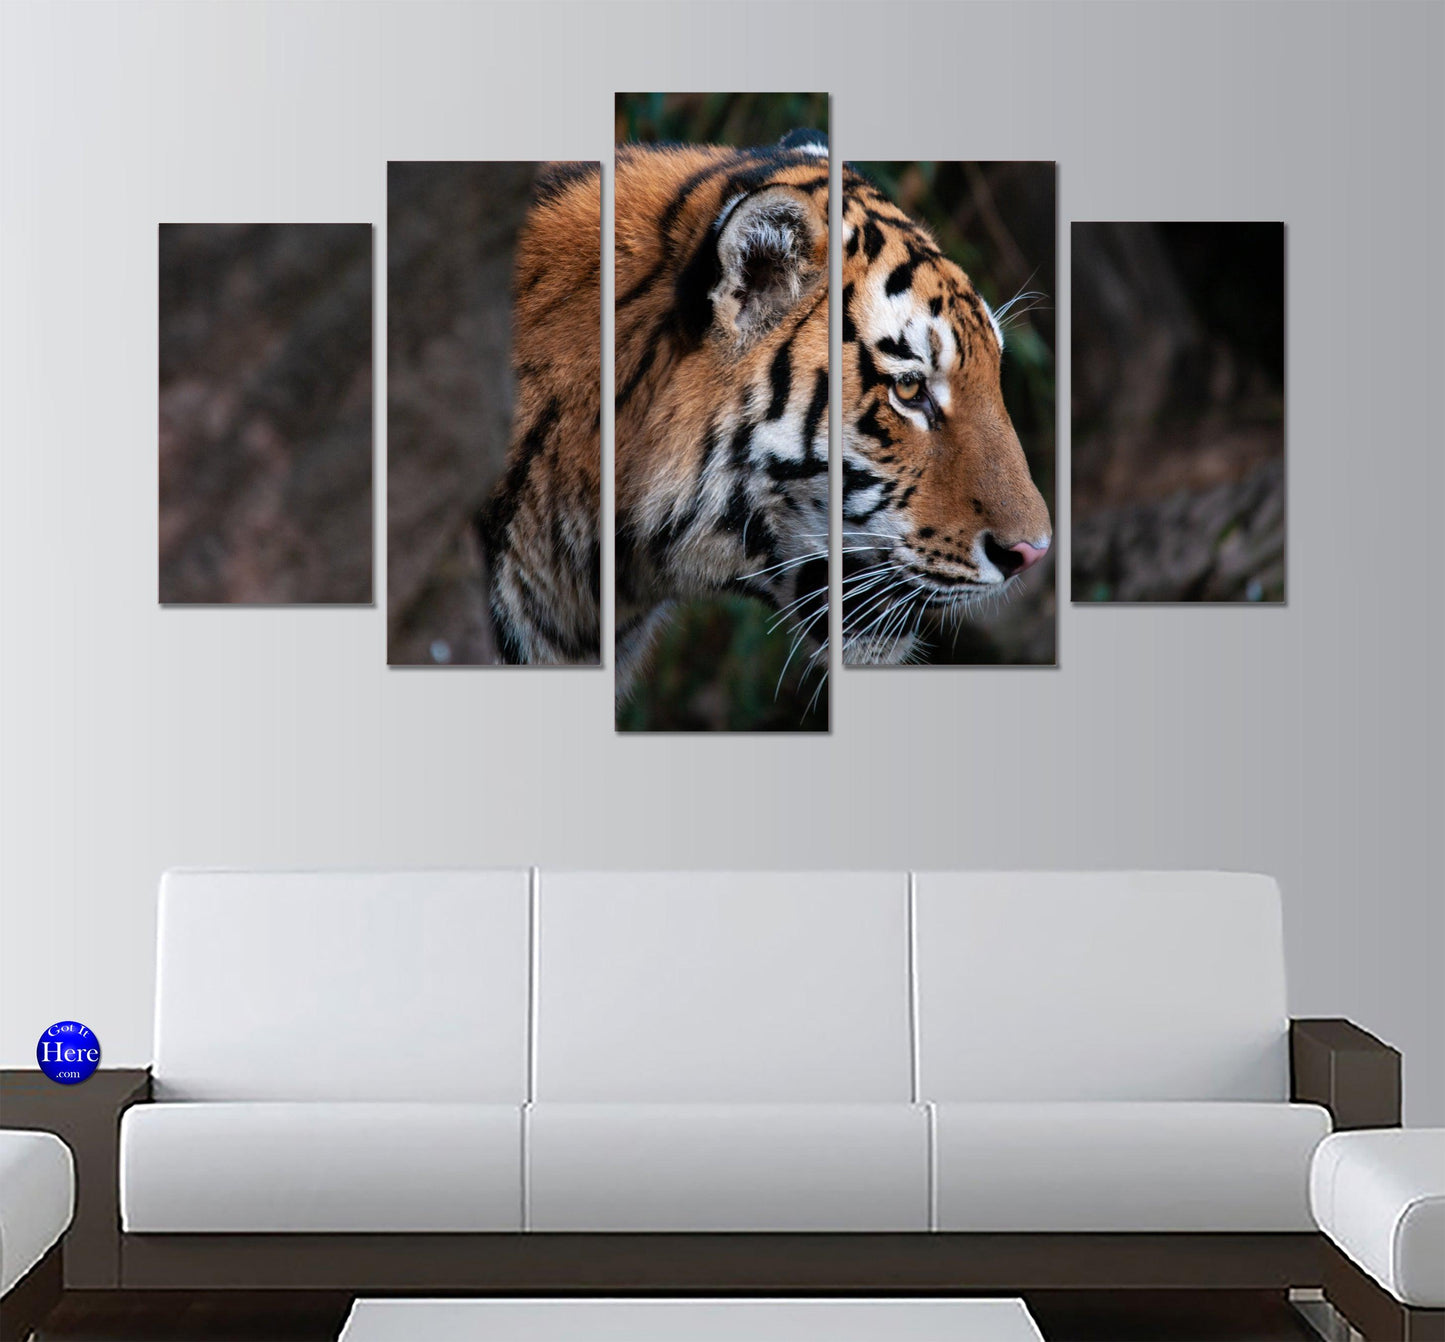 Tiger In The Jungle Forest 5 Panel Canvas Print Wall Art - GotItHere.com